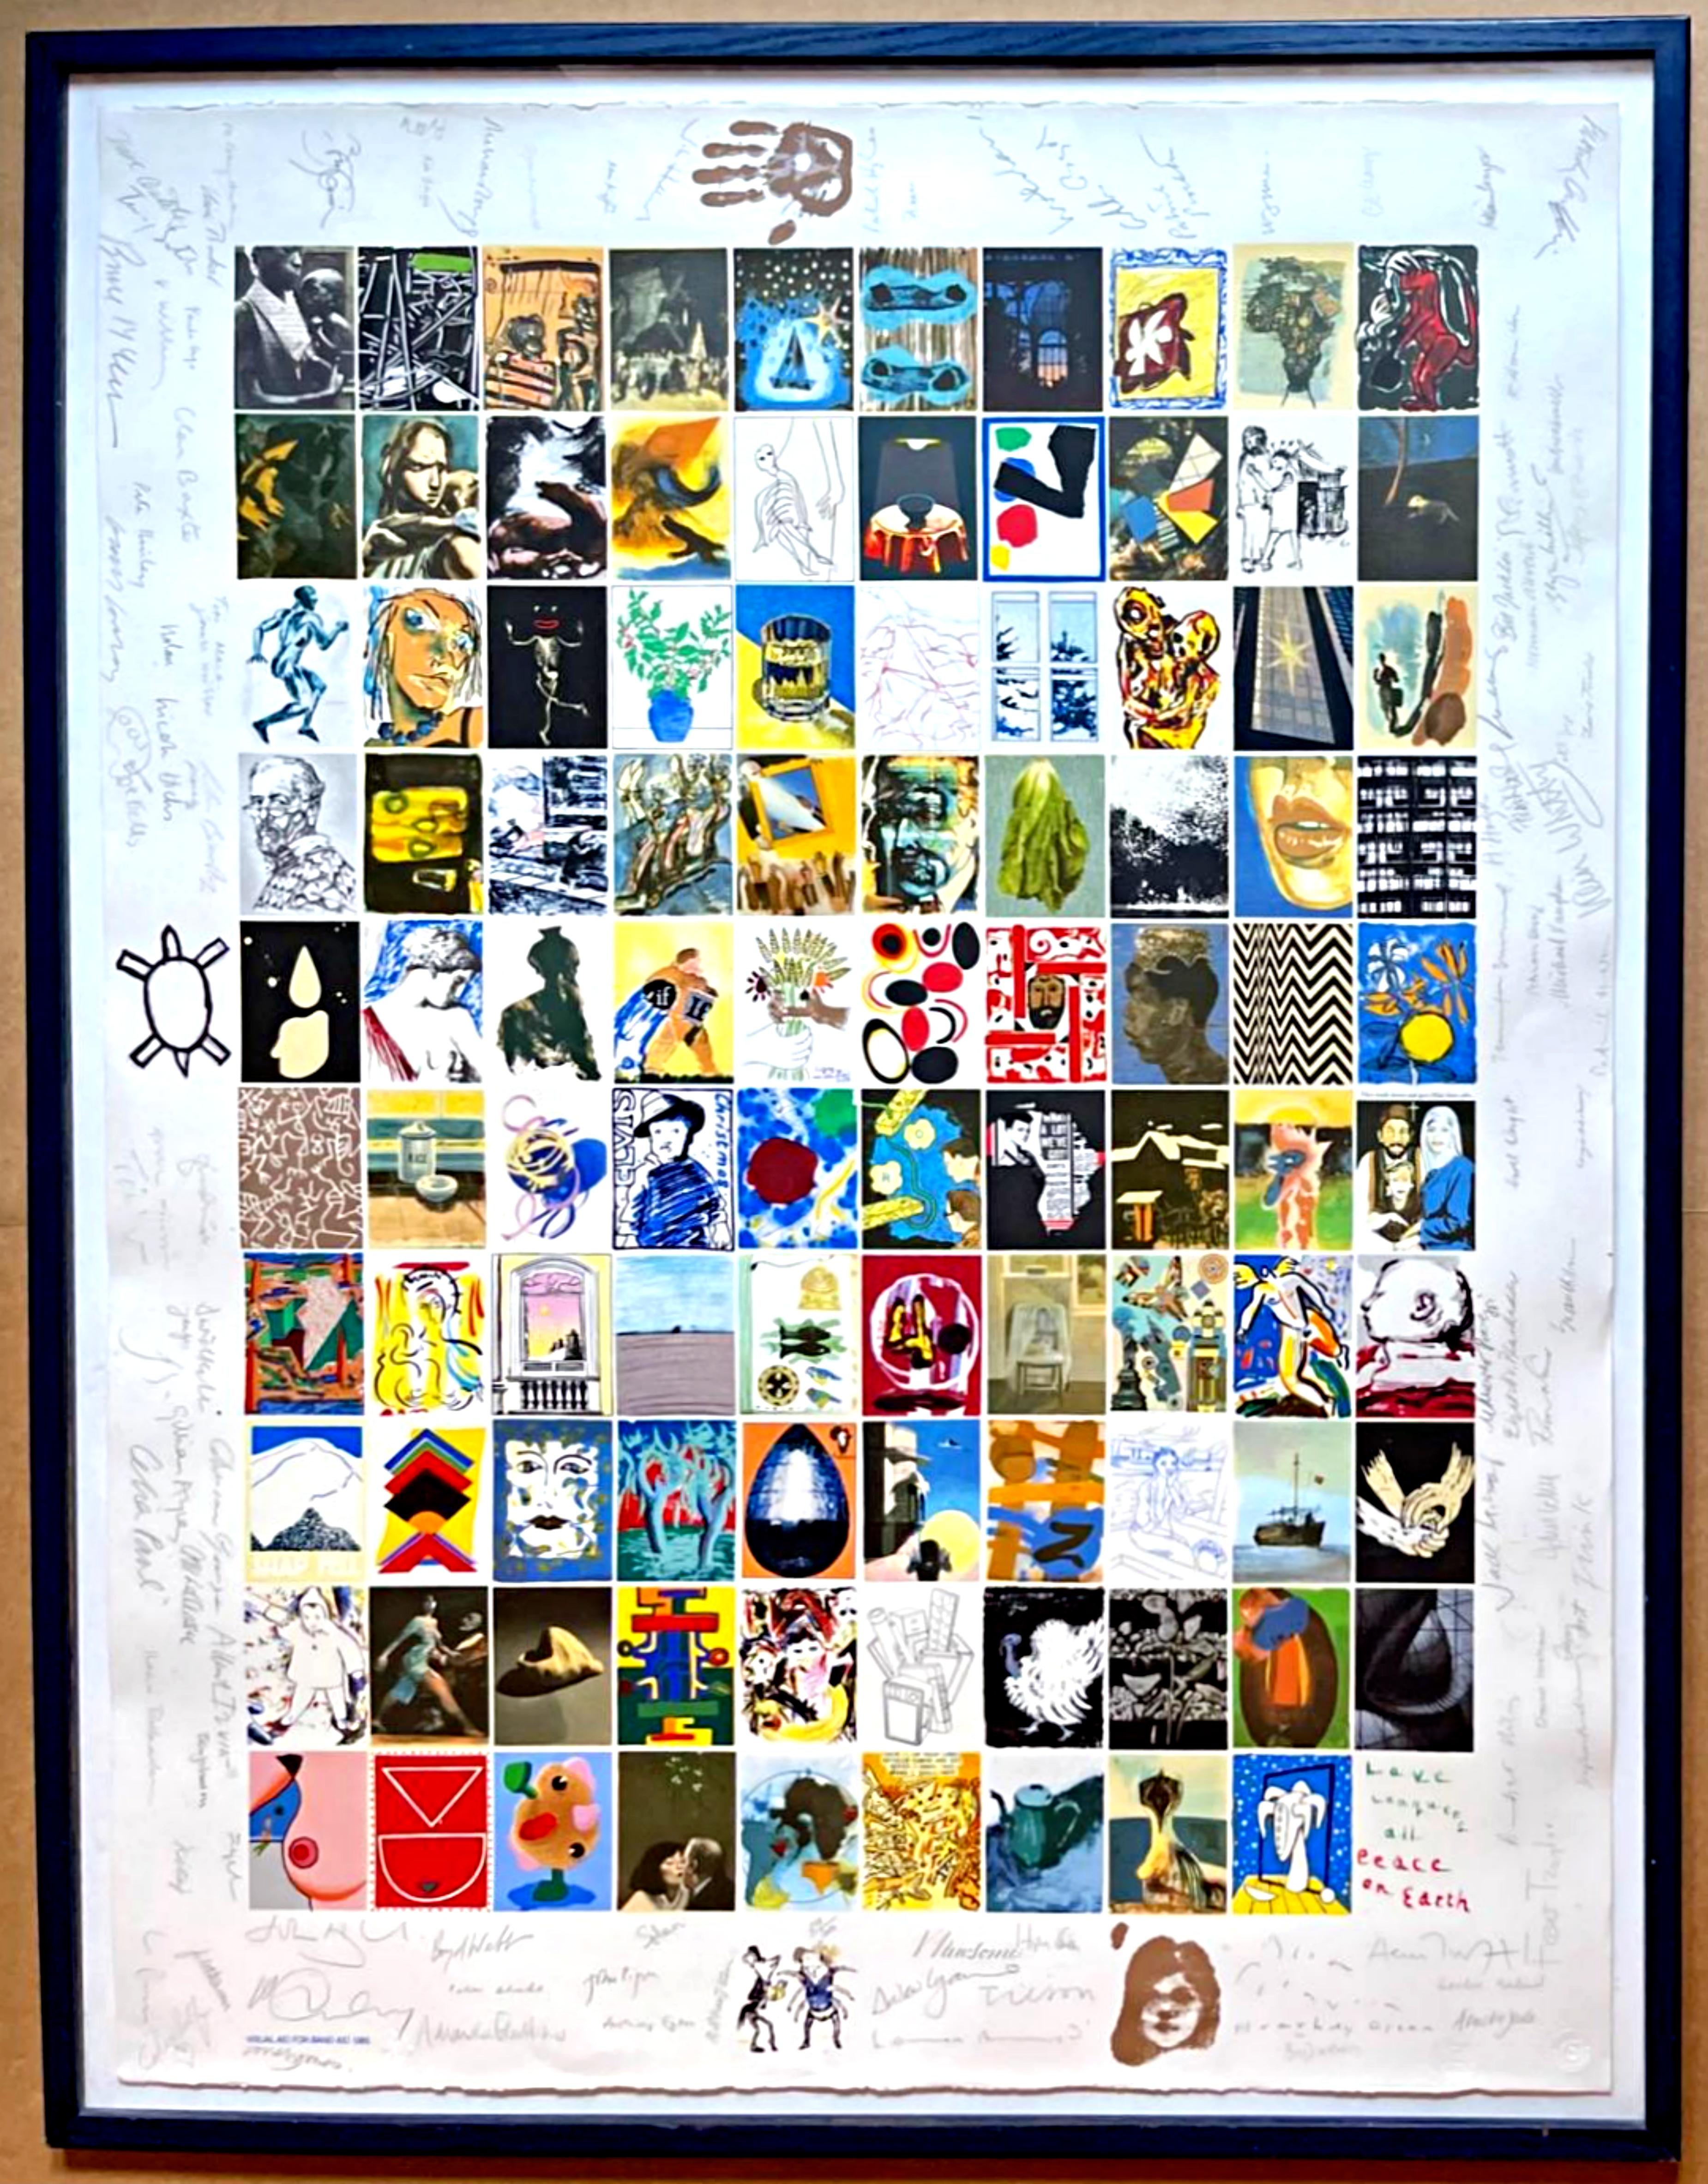 Visual Aid for Band Aid, print designed and hand signed by 104 renowned artists